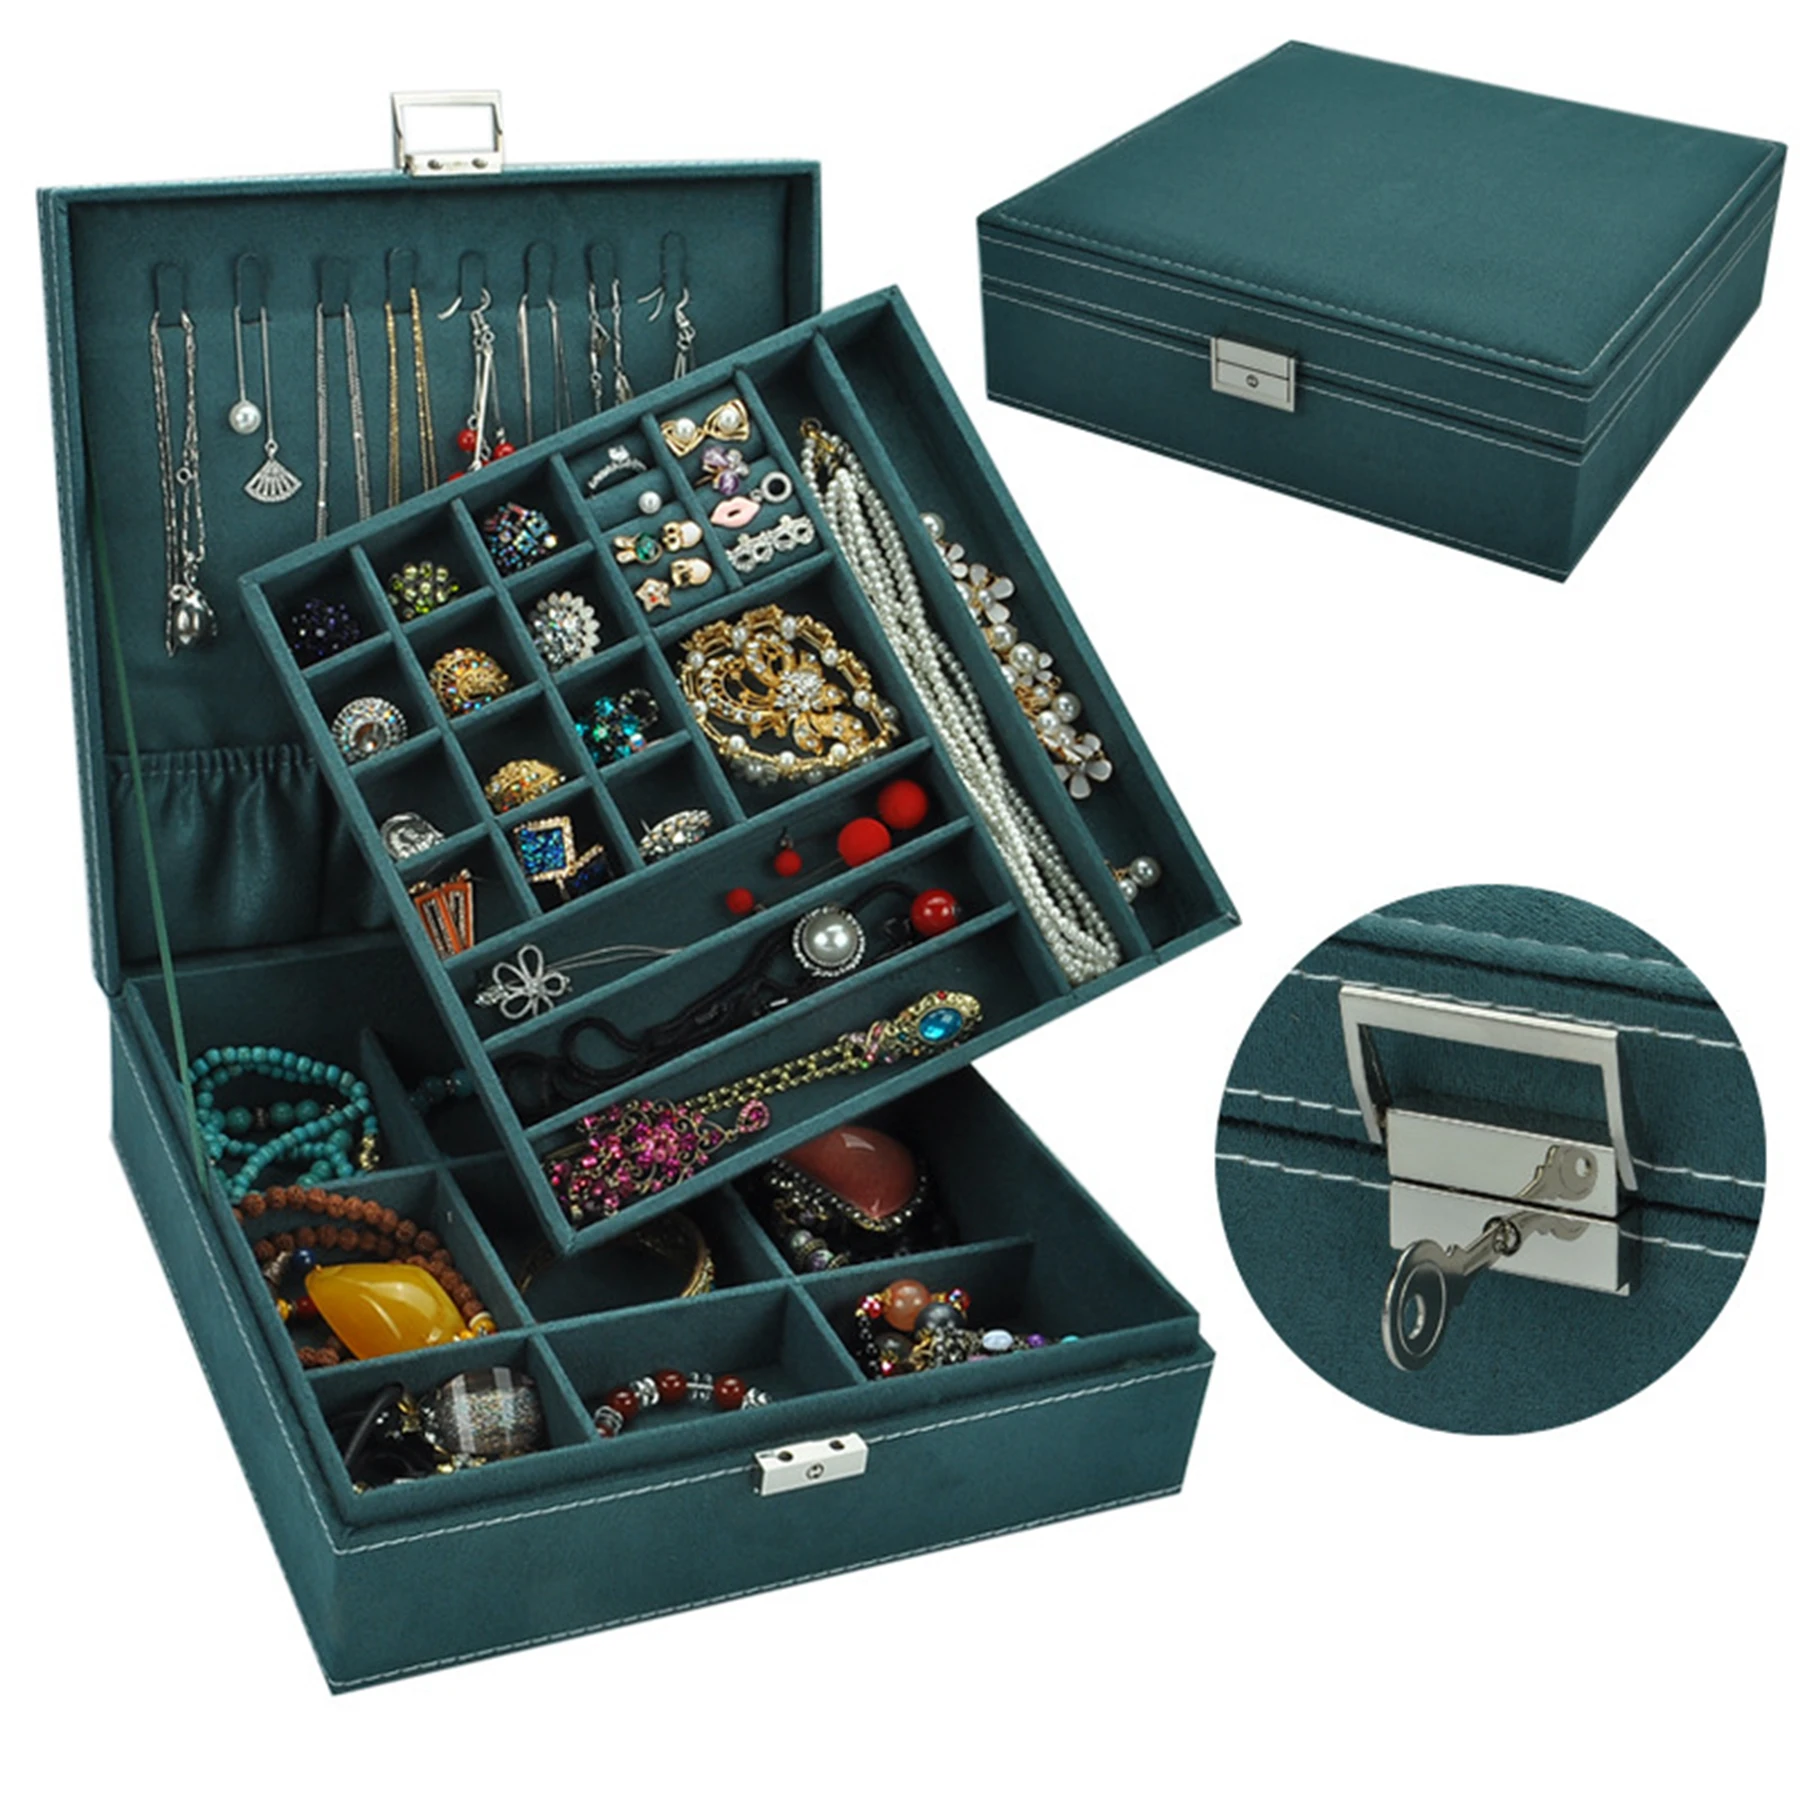 Smart Organizer 2-Layer Jewery PU Box with lock for Woman Girl Wife for Earrings Bracelets Rings Watches